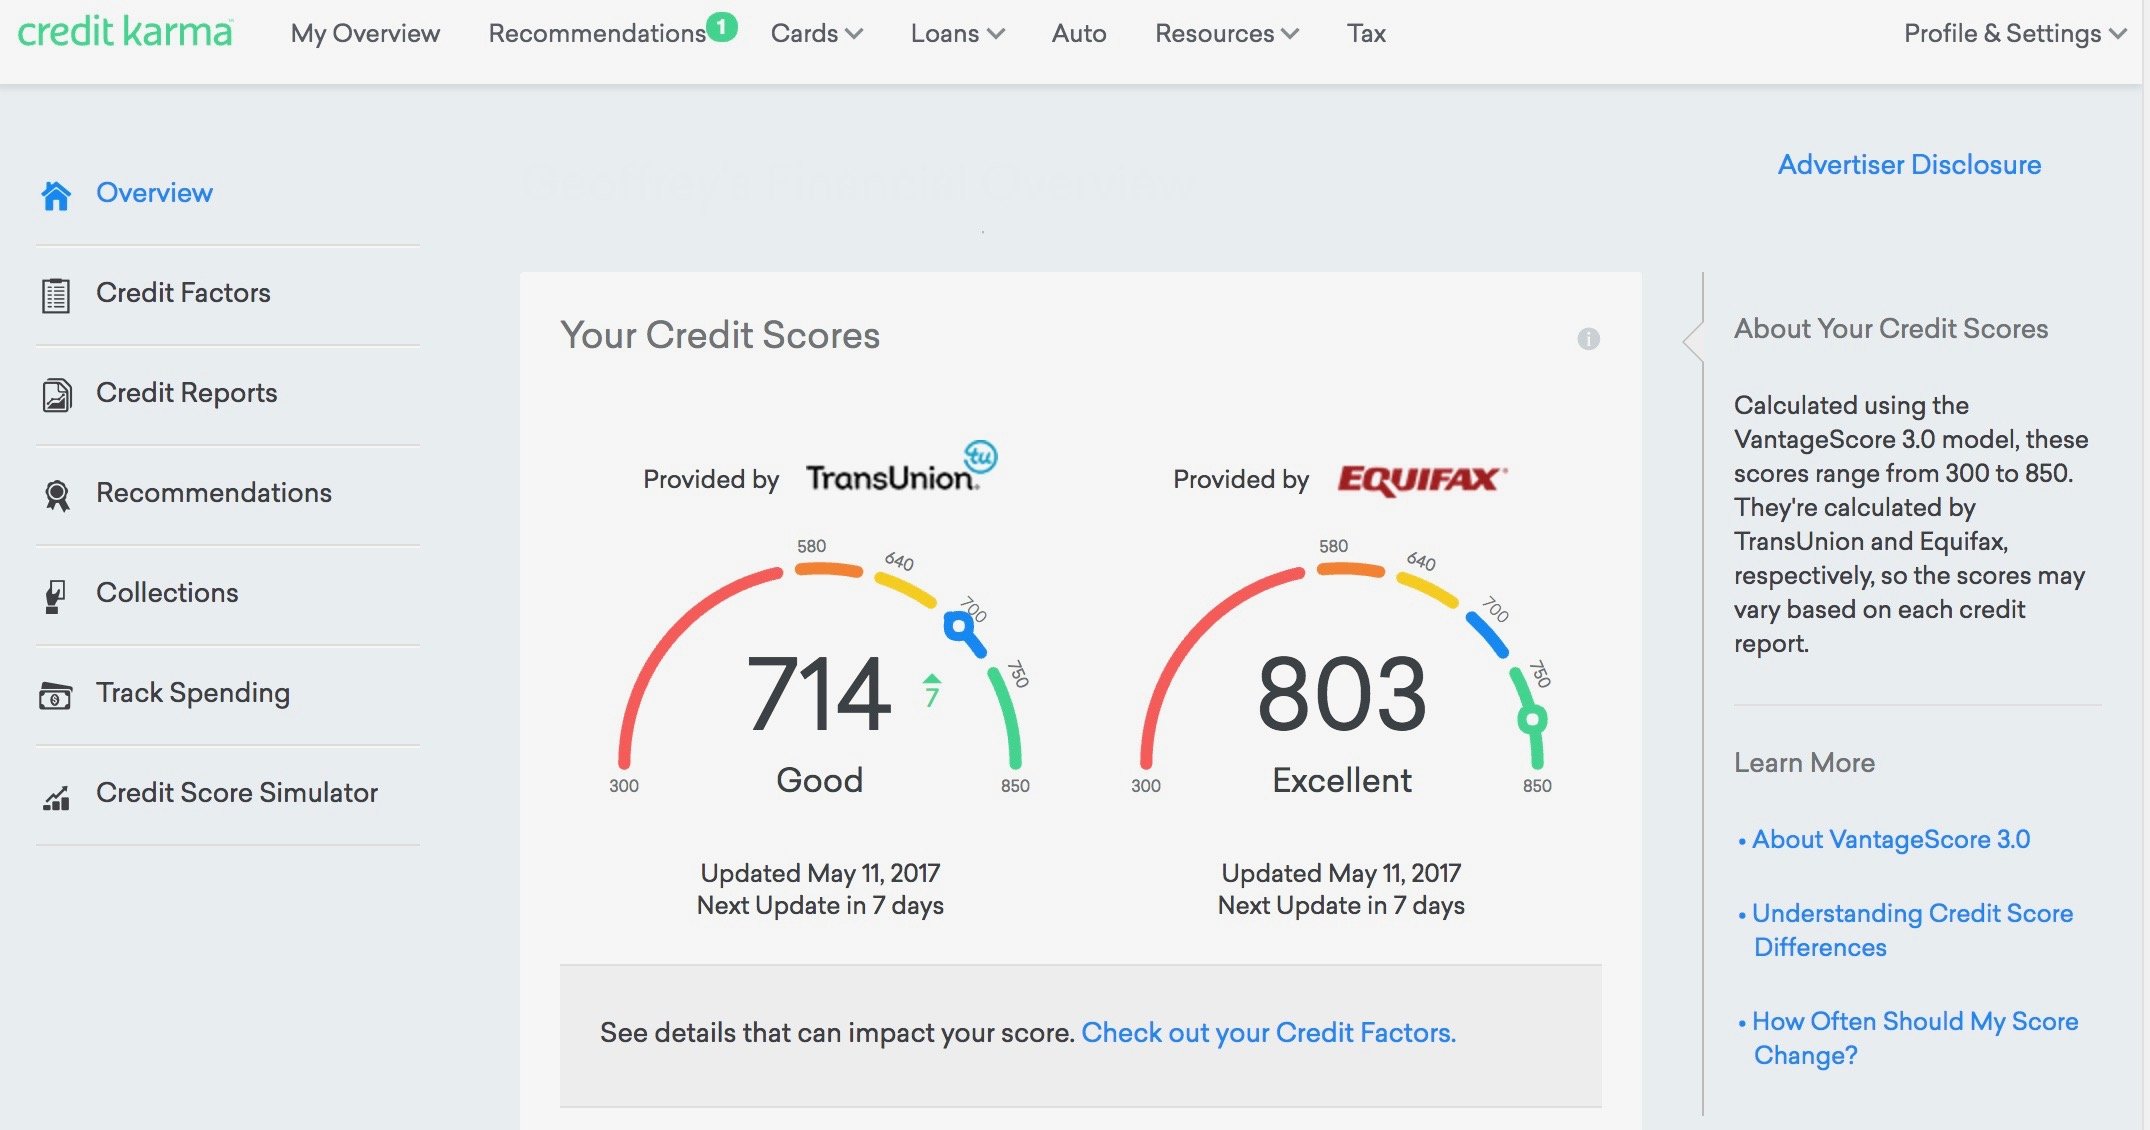 Credit Karma has Change for the Worst